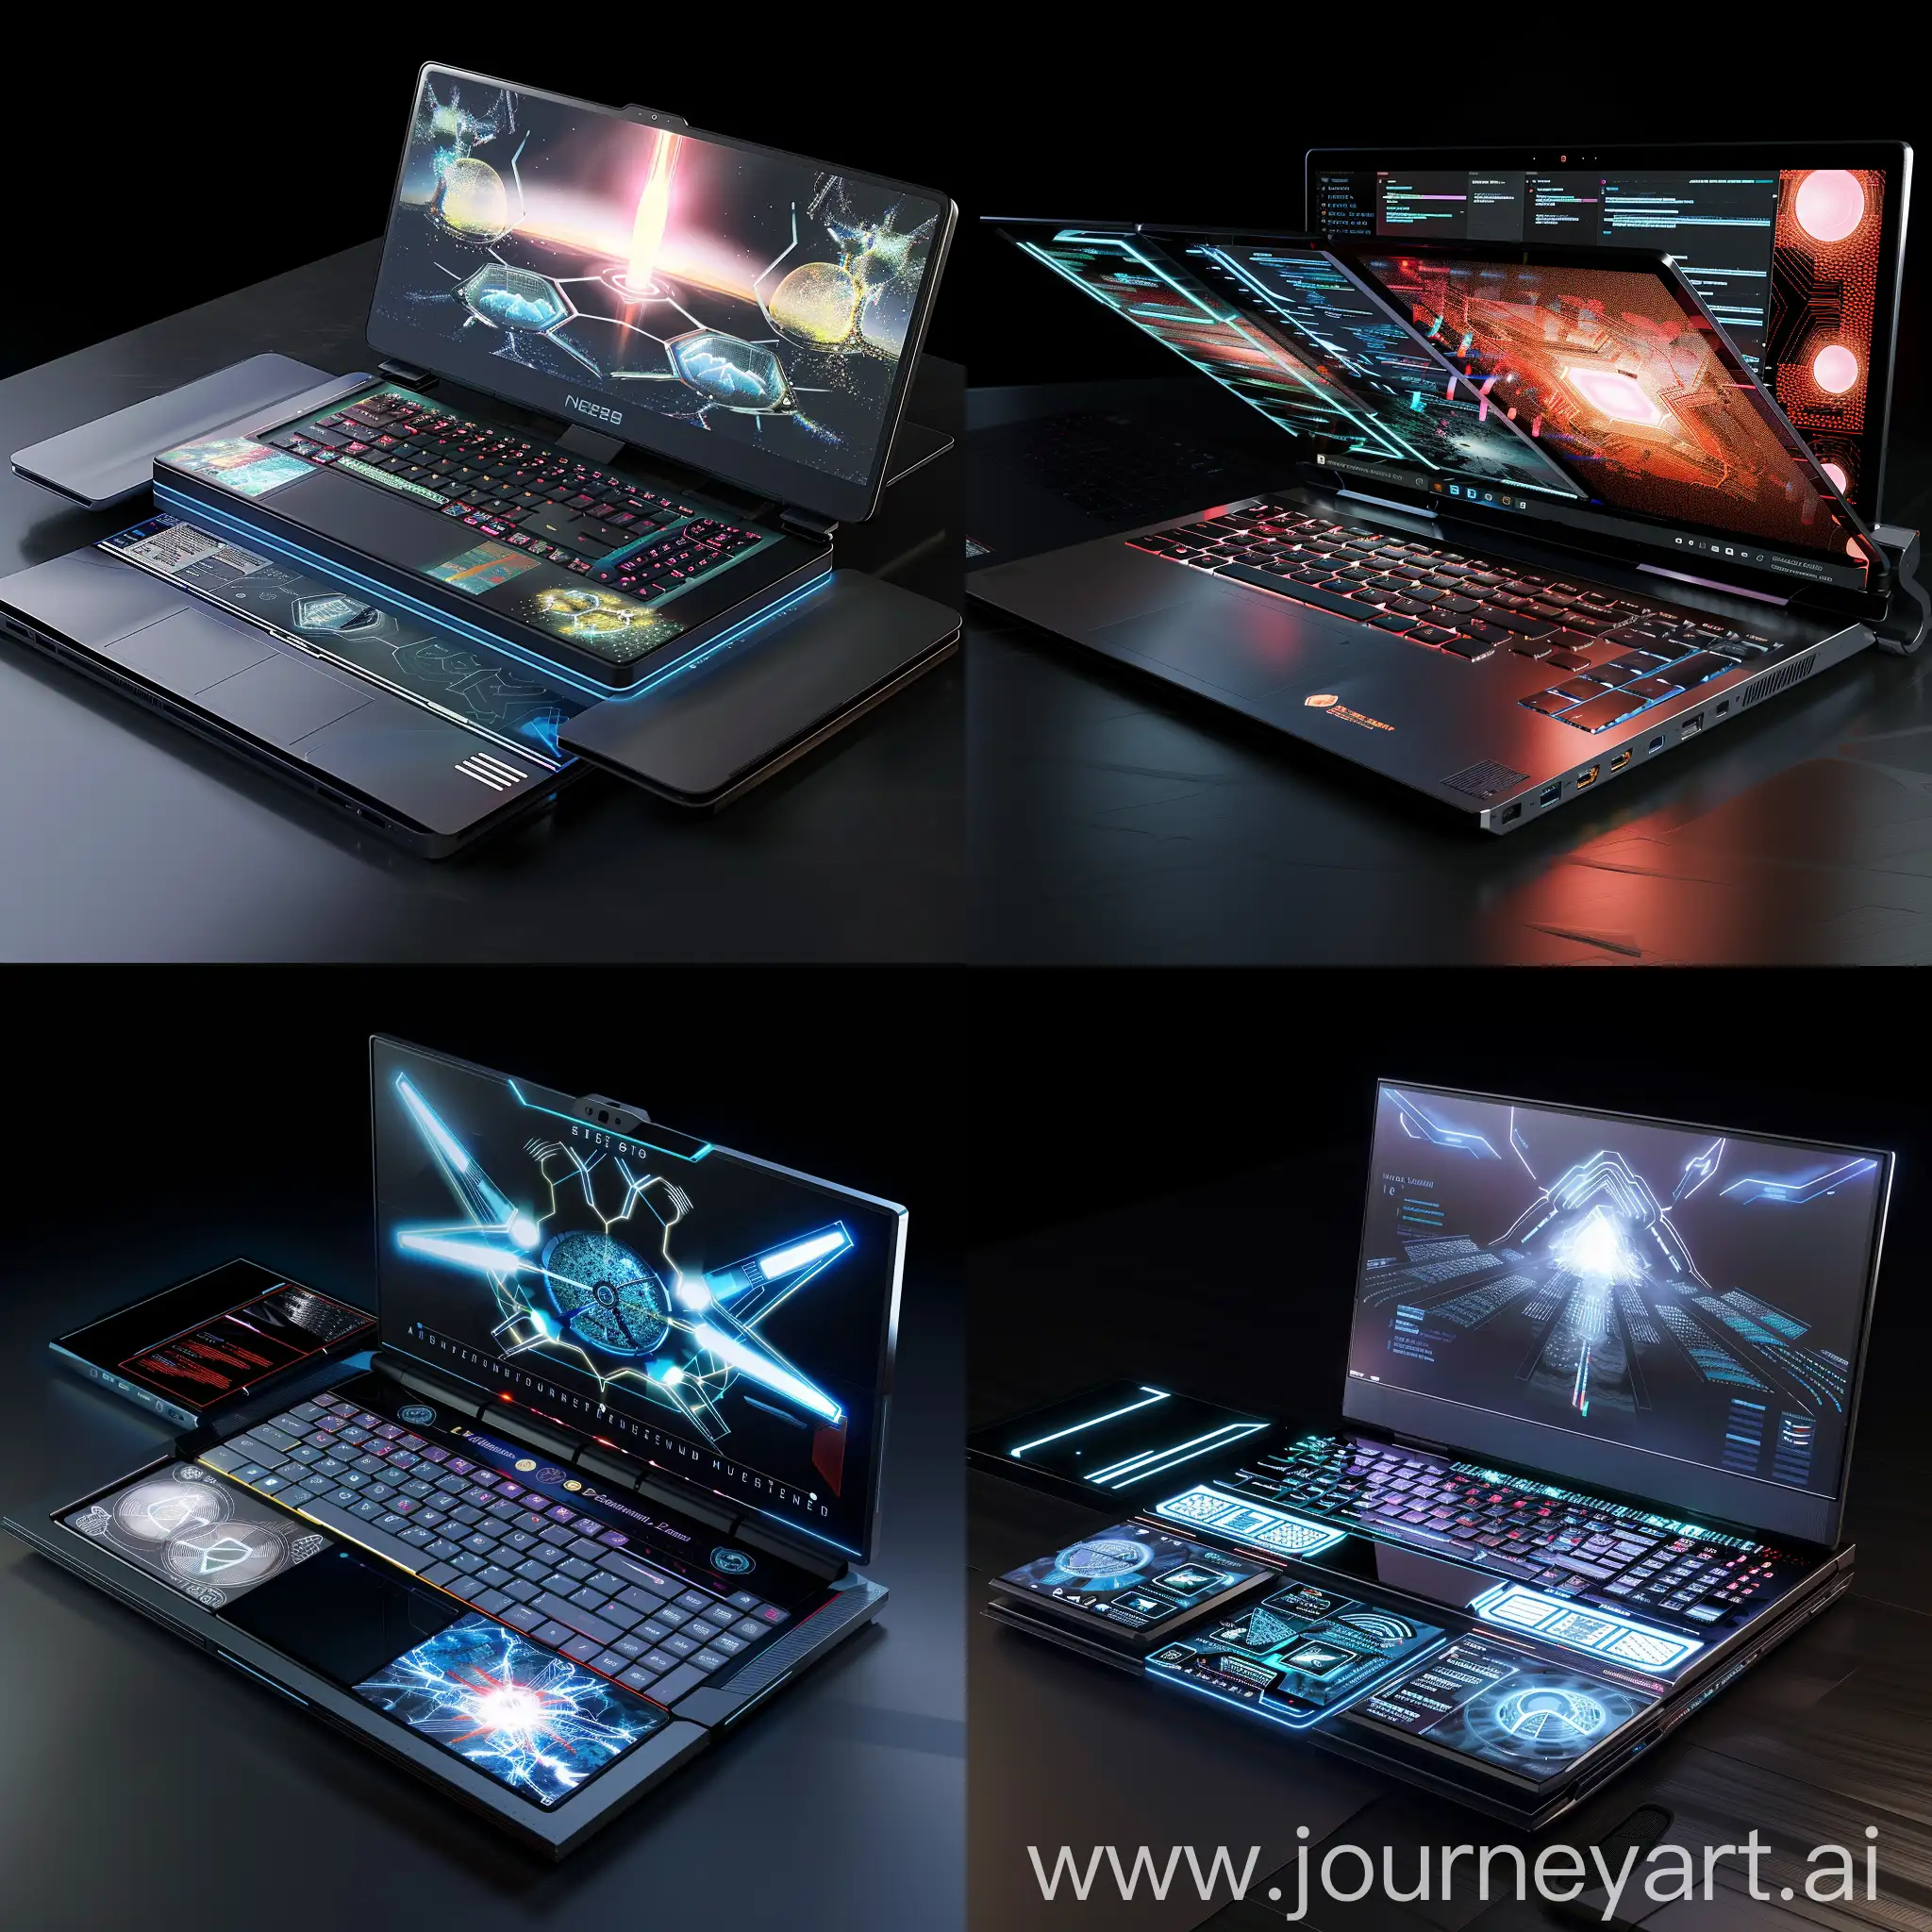 Futuristic laptop, information age of future, Neural Processing Units (NPUs), Foldable and Dual Screens, AI-enhanced GPUs, OLED Displays, Quantum Dot Technology, Advanced Cooling Systems, Solid-state Storage (SSD), 5G and Wi-Fi 6E Connectivity, Biometric Security, Modular Components, Cloud Integration, Edge Computing, AI Co-processors, Smart Battery Management, Enhanced Encryption, Smart Battery Management, Enhanced Encryption, Virtual Reality (VR) and Augmented Reality (AR) Support, Wearable Device Integration, Voice Assistants, Adaptive Learning Algorithms, Sustainable Materials, Foldable and Flexible Displays, Transparent and Holographic Displays, Modular Design, Ultrathin Bezels and Edge-to-Edge Displays, Integrated E-Ink Displays, Biometric Security Features, E-ink Keyboards, Solar Charging Panels, 360-Degree Hinges and Dual-Screen Design, Haptic Feedback and Tactile Surfaces, Always-On Connectivity, Seamless Integration with Other Devices, Wearable Compatibility, Embedded Projectors, Augmented Reality (AR) Interfaces, Voice Control Integration, Eco-Friendly Materials, Dynamic Privacy Screens, Enhanced Portability, Advanced Cooling Solutions, unreal engine 5 --stylize 1000